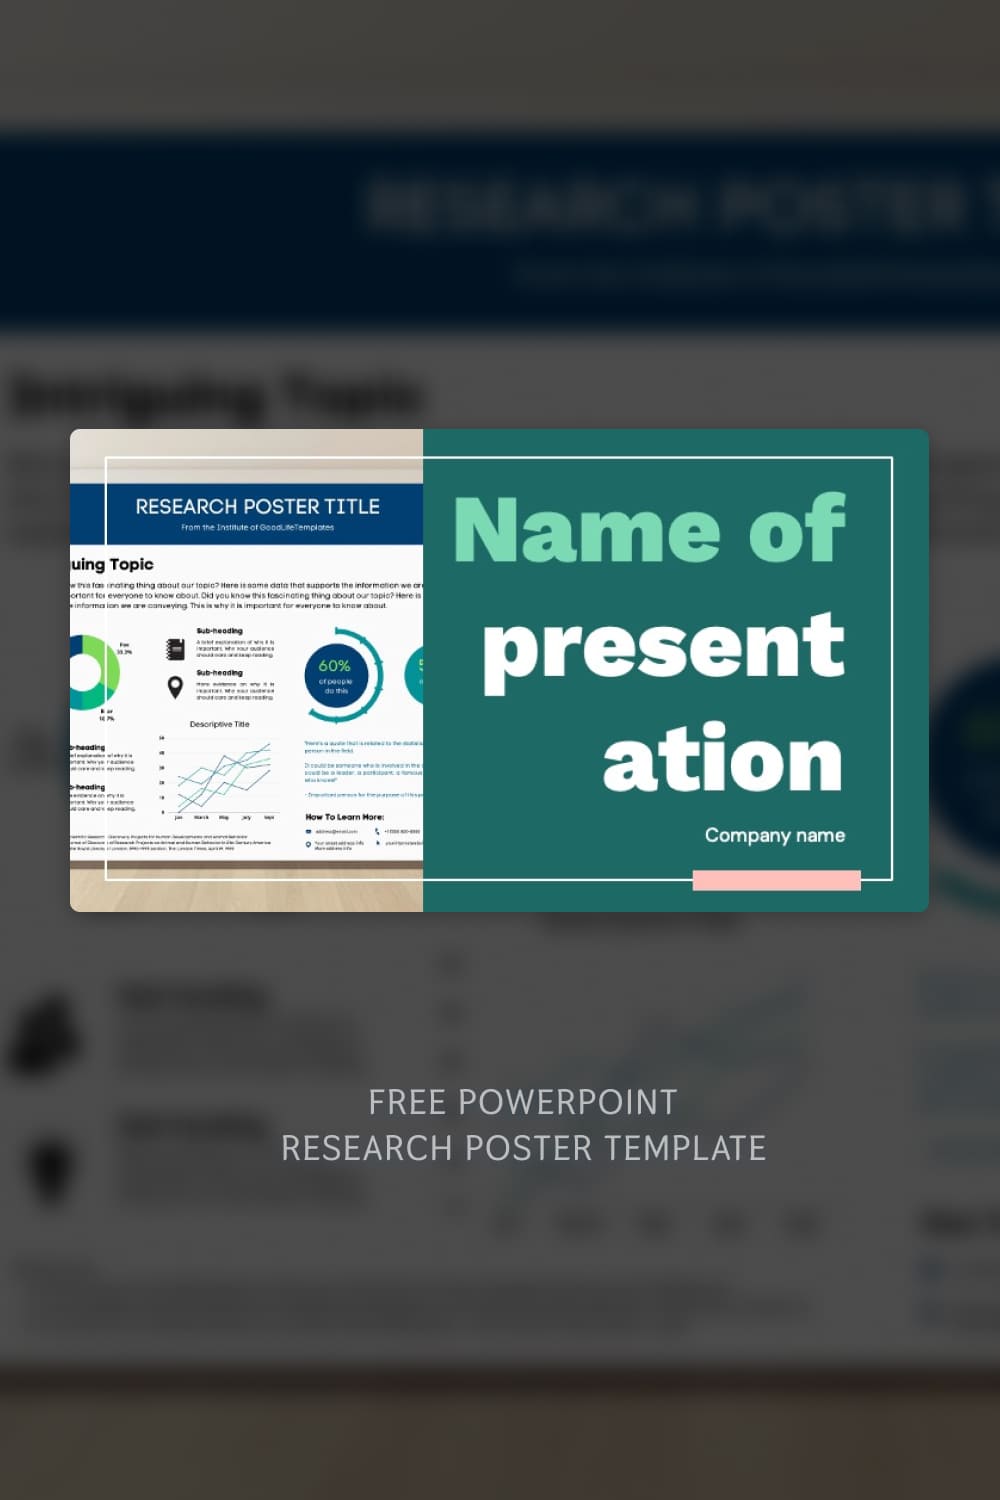 Free Powerpoint Research Poster Template Pinterest.